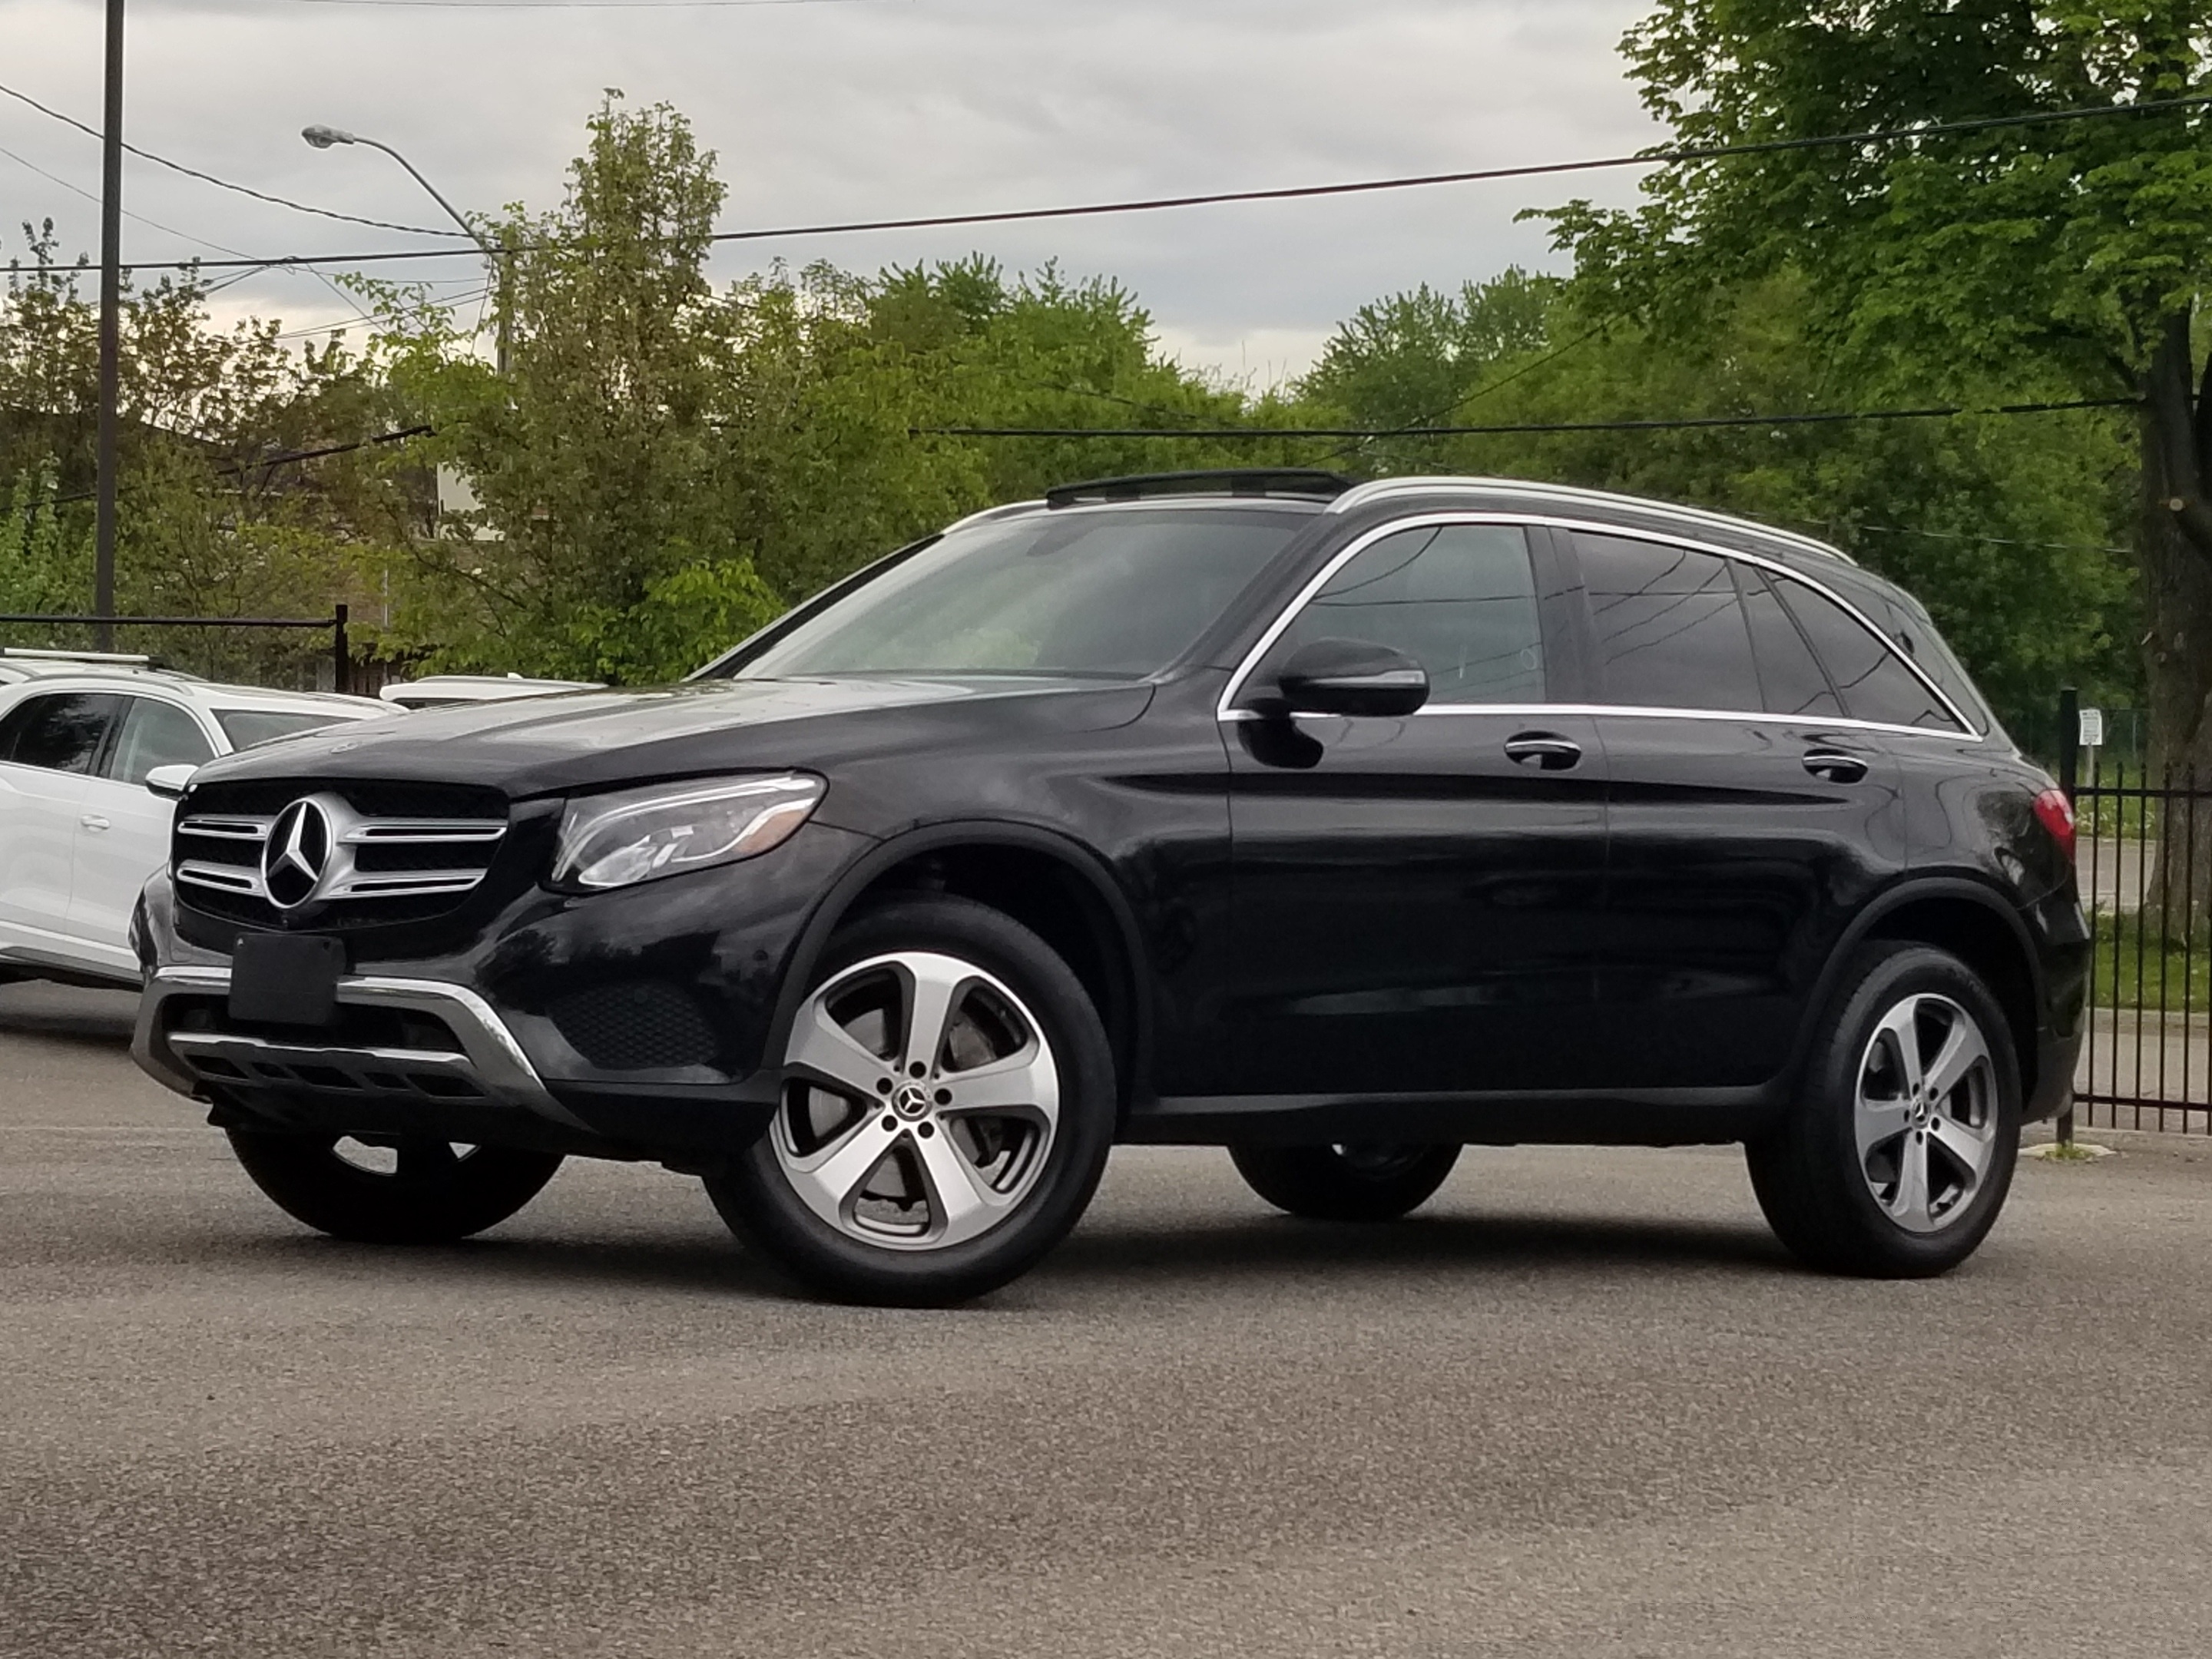 2019 Mercedes-Benz GLC 1 OWNER|NO ACCIDENT|NAV|360 CAMERA|PANO|LED|HEATED